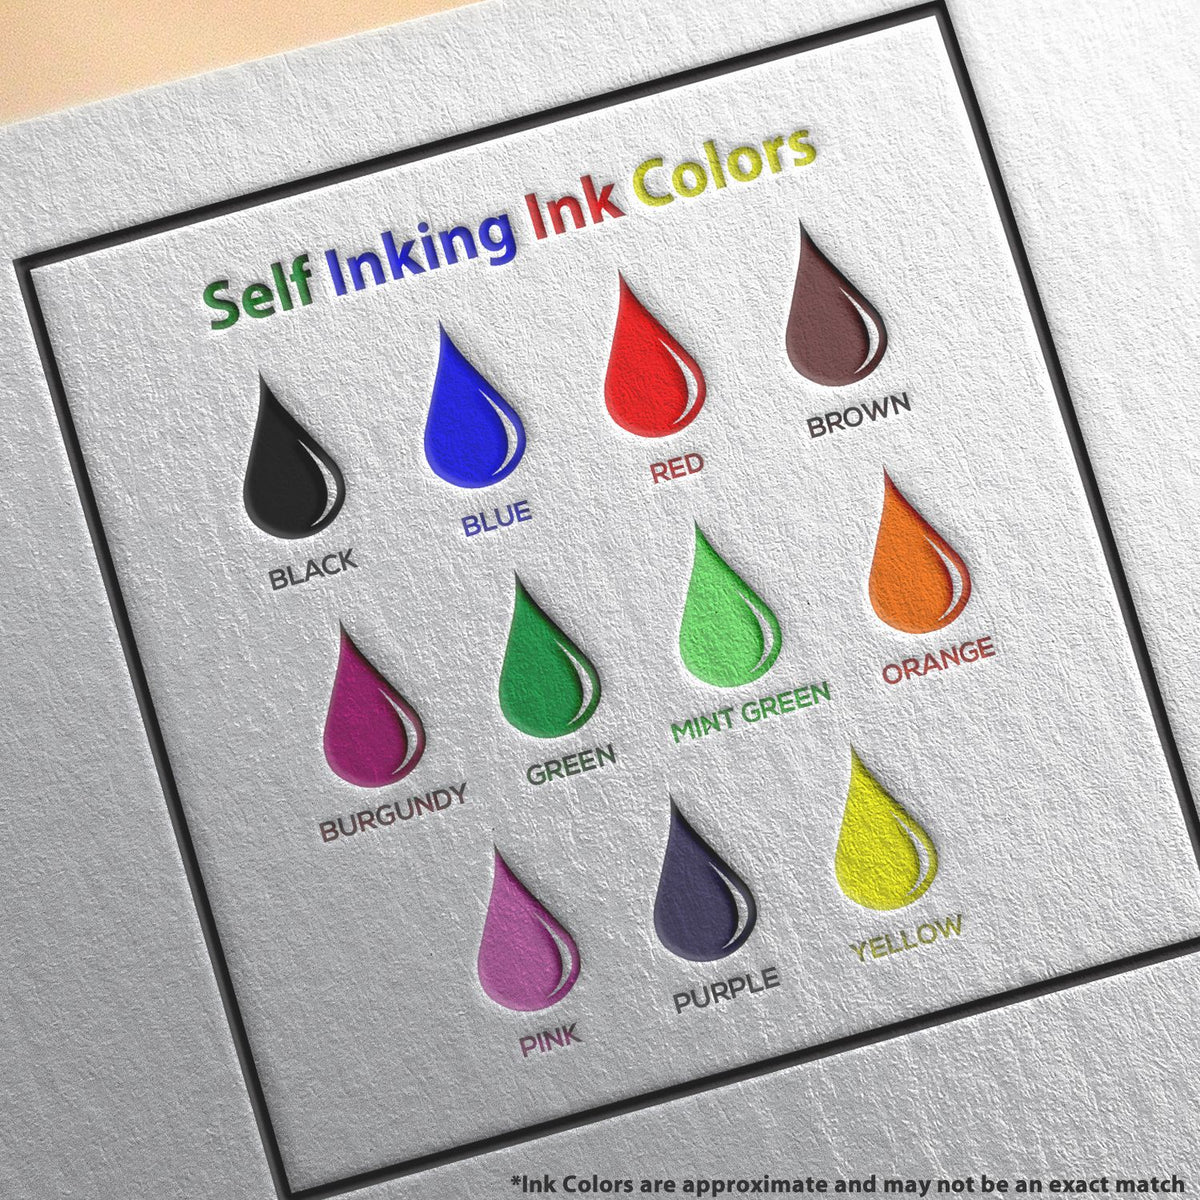 A picture showing the different ink colors or hues available for the Self-Inking West Virginia Landscape Architect Stamp product.